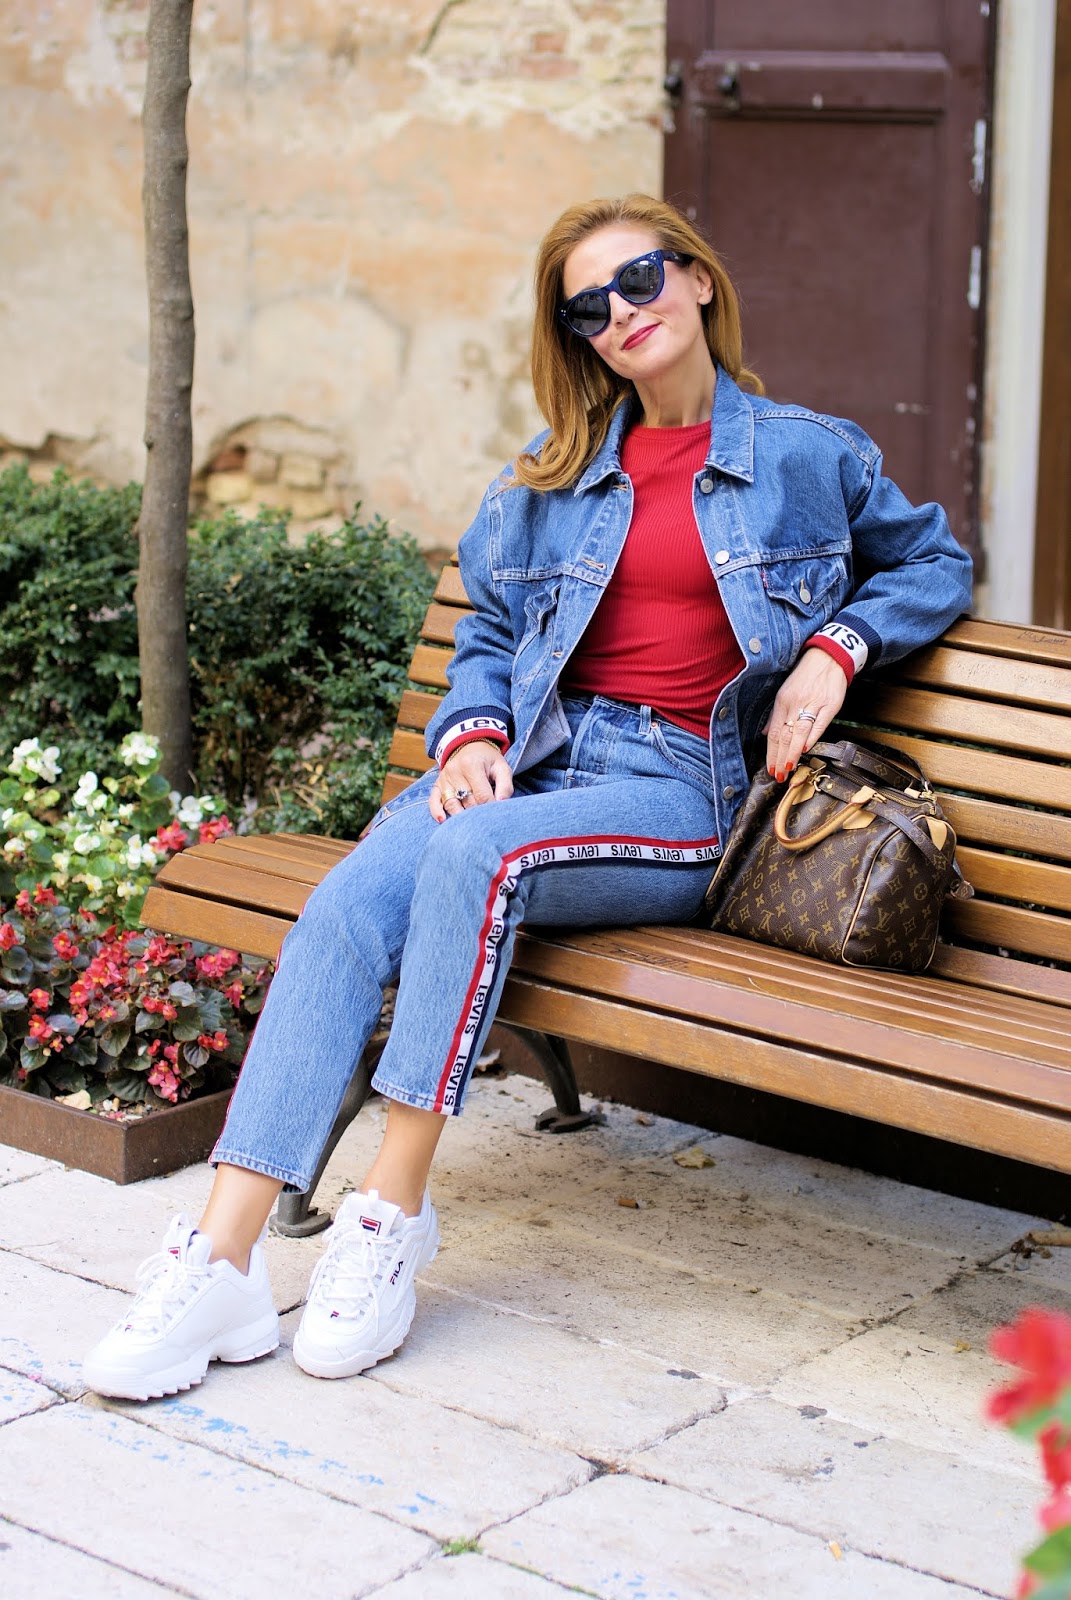 The Logomania trend and Fila Disruptor sneakers on Fashion and Cookies fashion blog, fashion blogger style